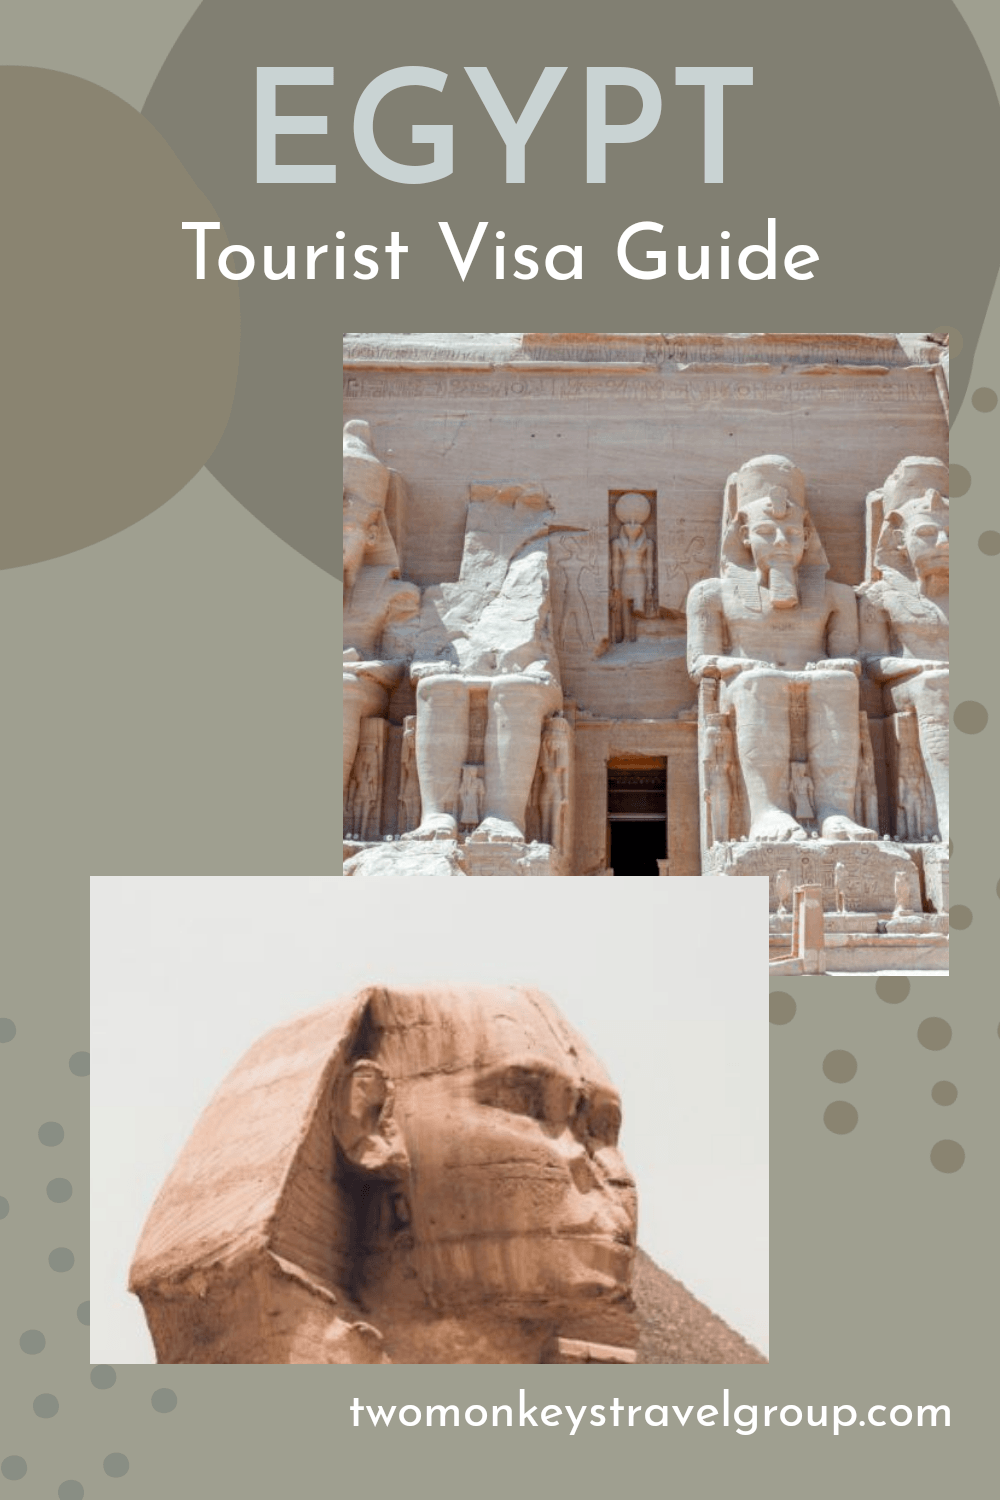 How to Apply For An Egypt Tourist Visa with Your Philippines Passport